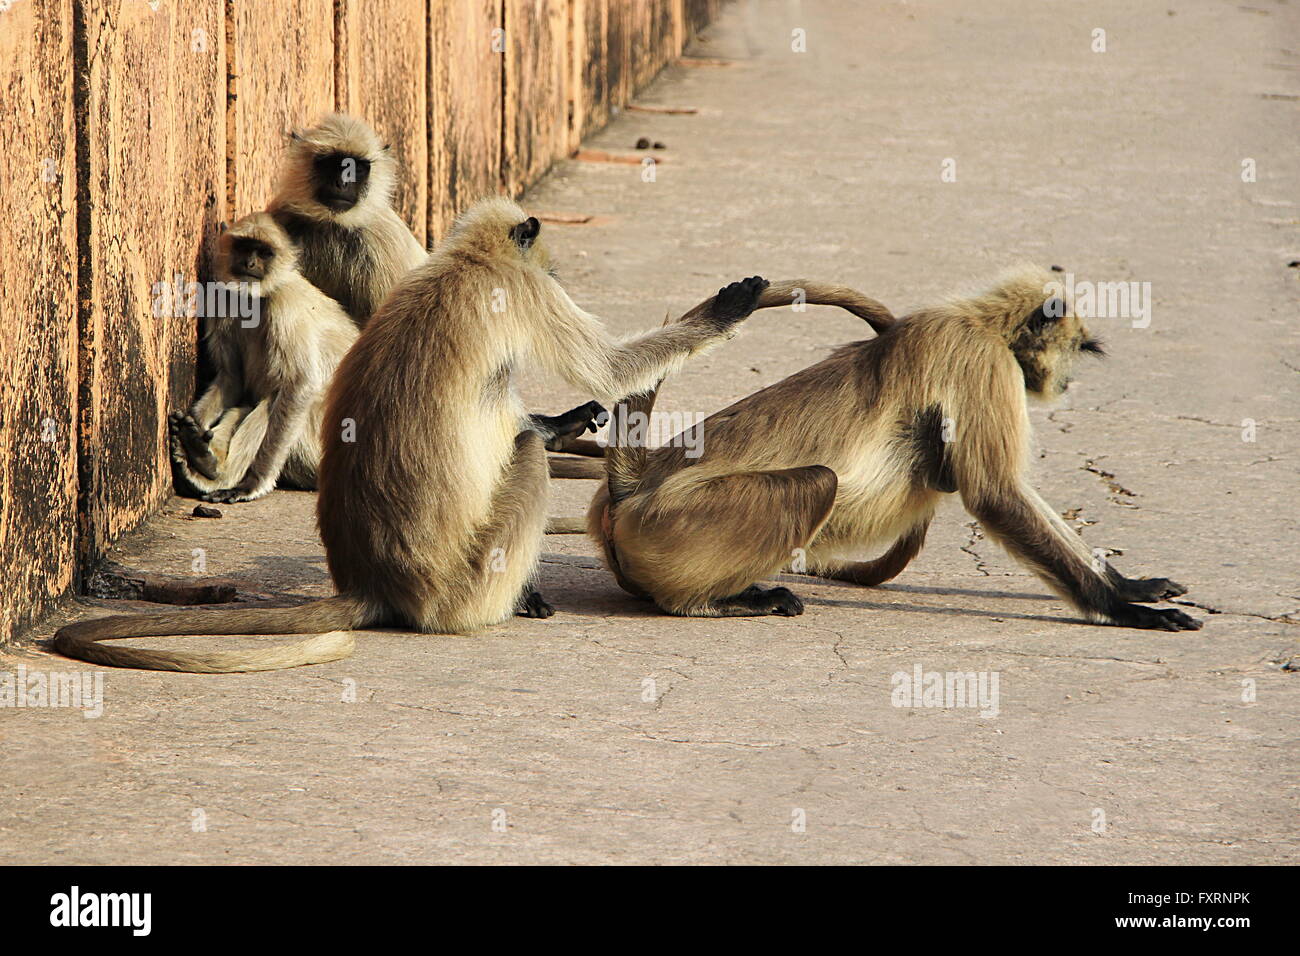 Different activities and moods of two pairs of monkeys Stock Photo